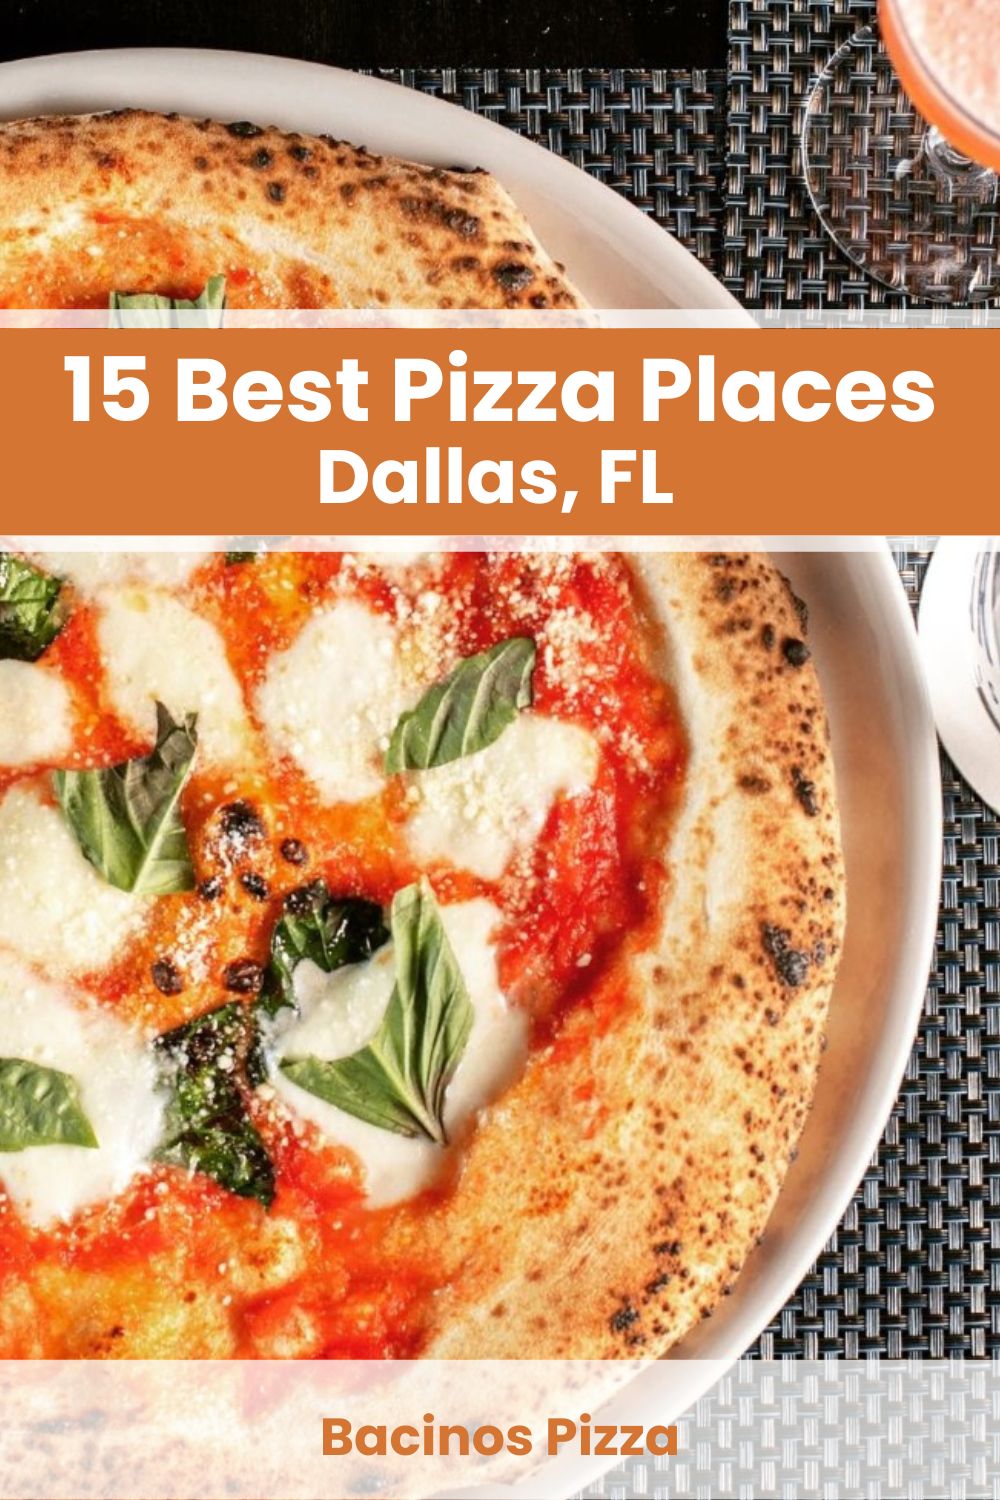 Best Pizza Places in Dallas